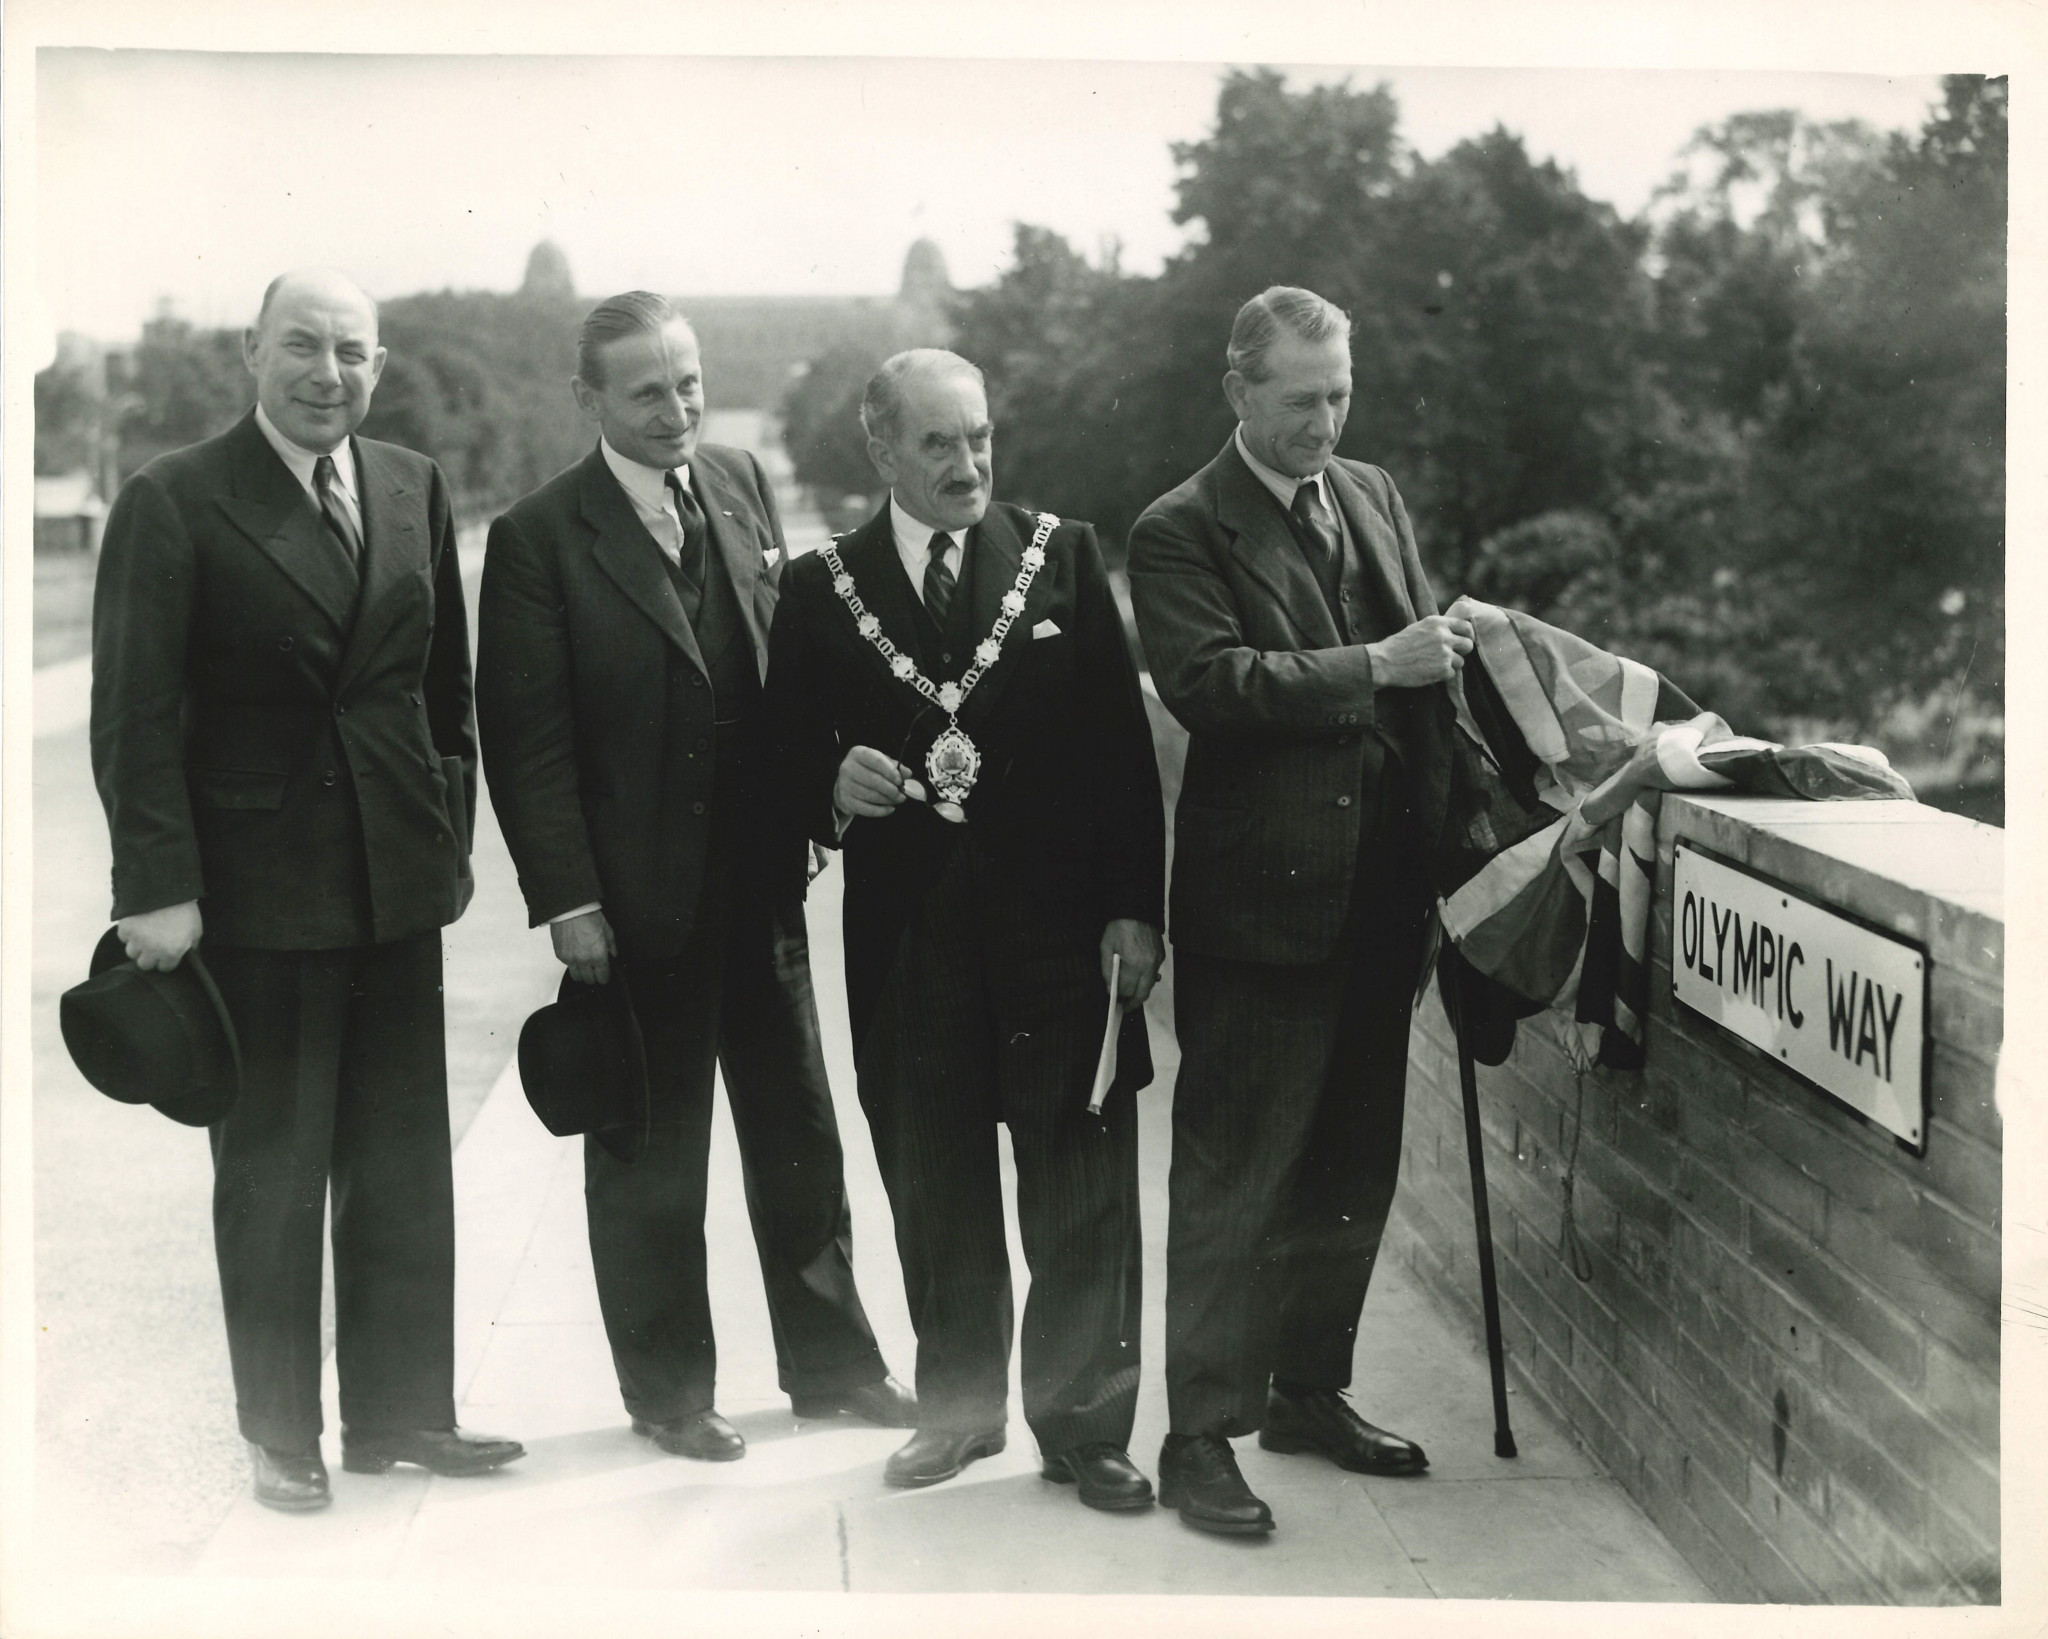 Transport Minister Alfred Barnes performed the original opening of the Olympic Way in 1948 ©Margaret Winter/Quintain